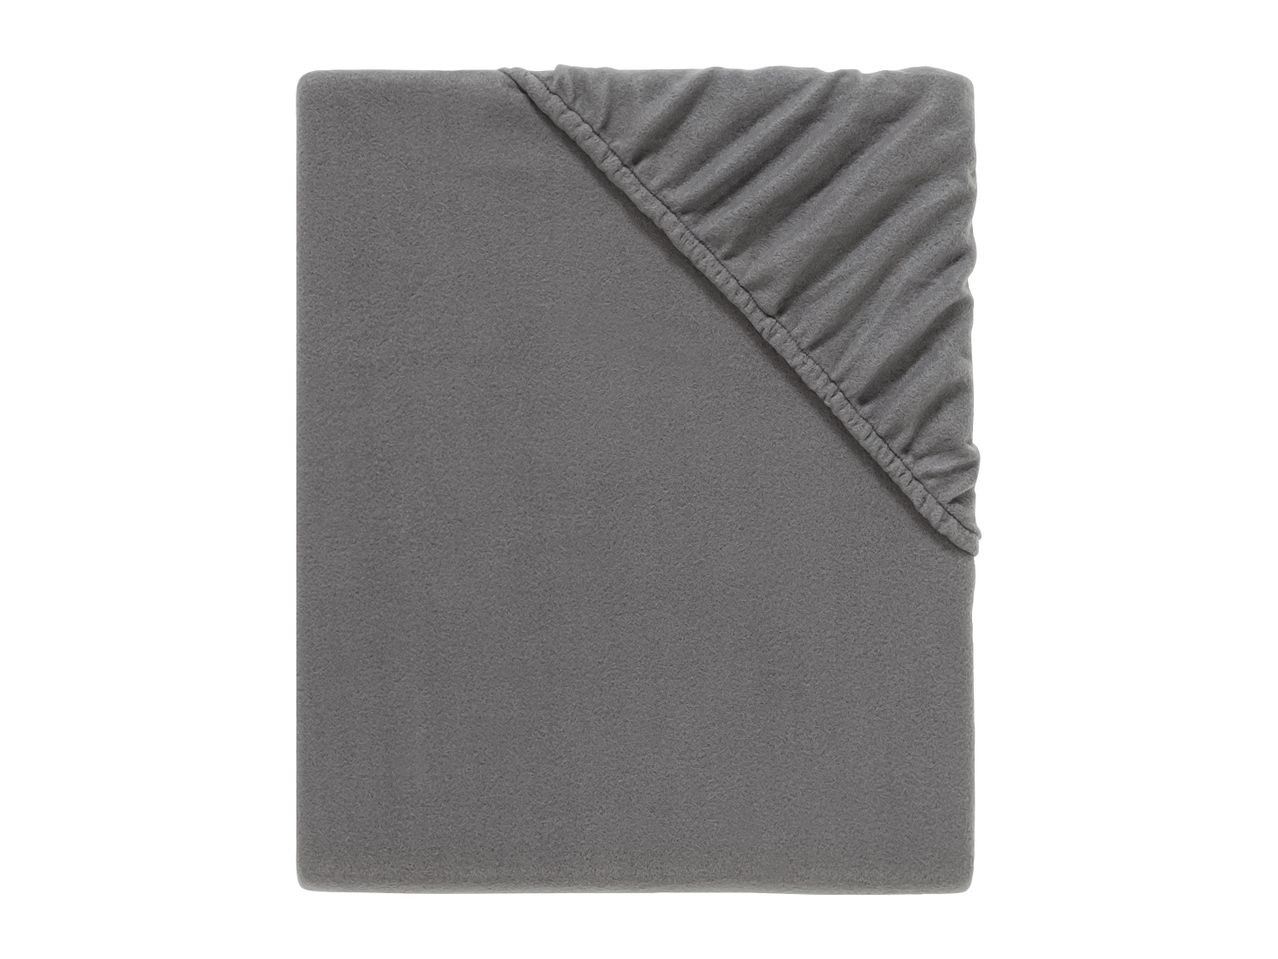 Go to full screen view: Livarno Home Fleece Fitted Sheet - Single - Image 3